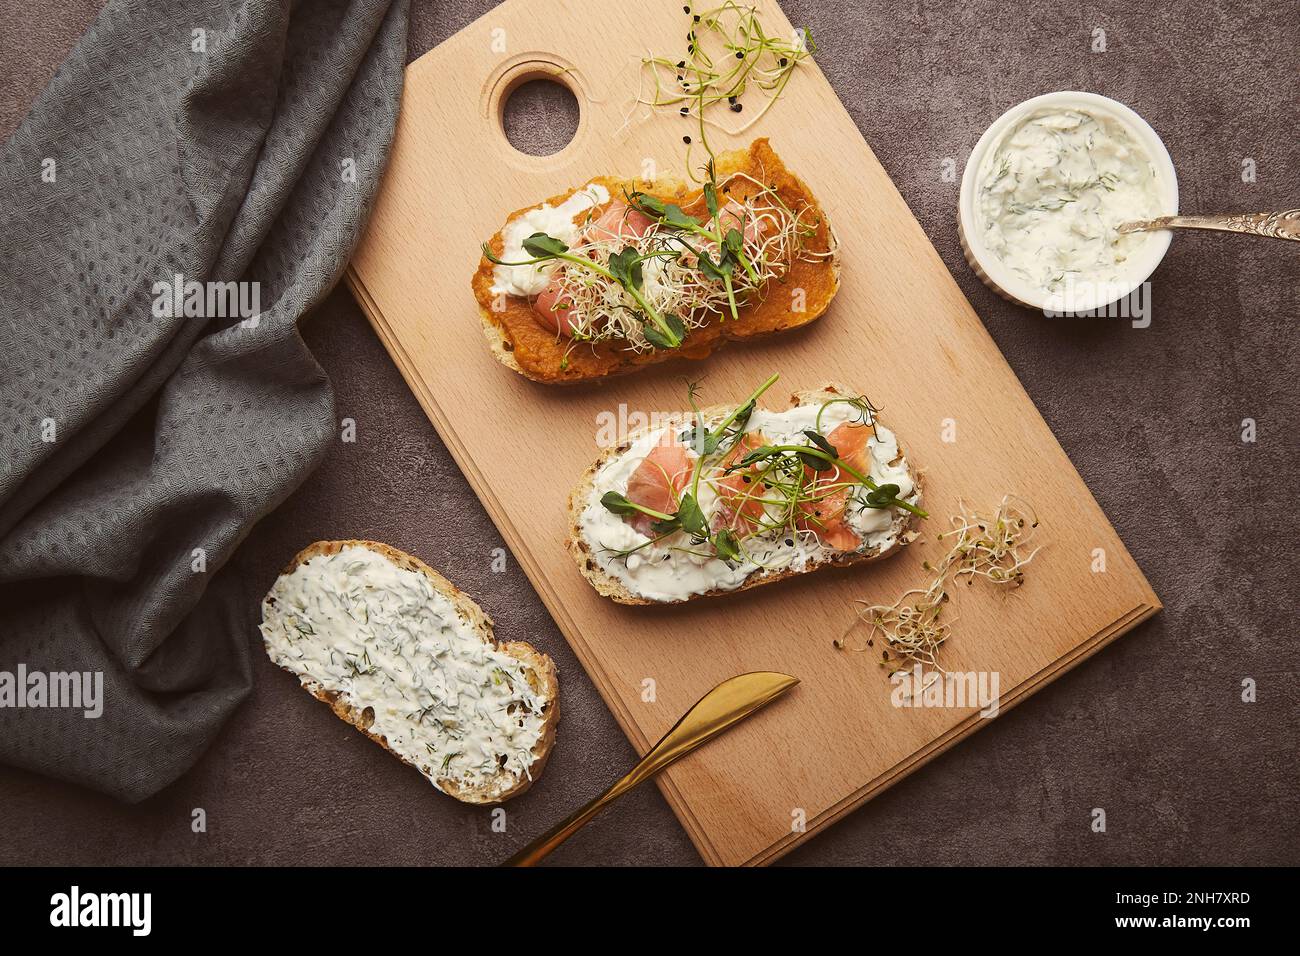 Sandwiches with zucchini spread, salmon and sour cream garlic sauce. Low in calories healthy breakfast. Stock Photo